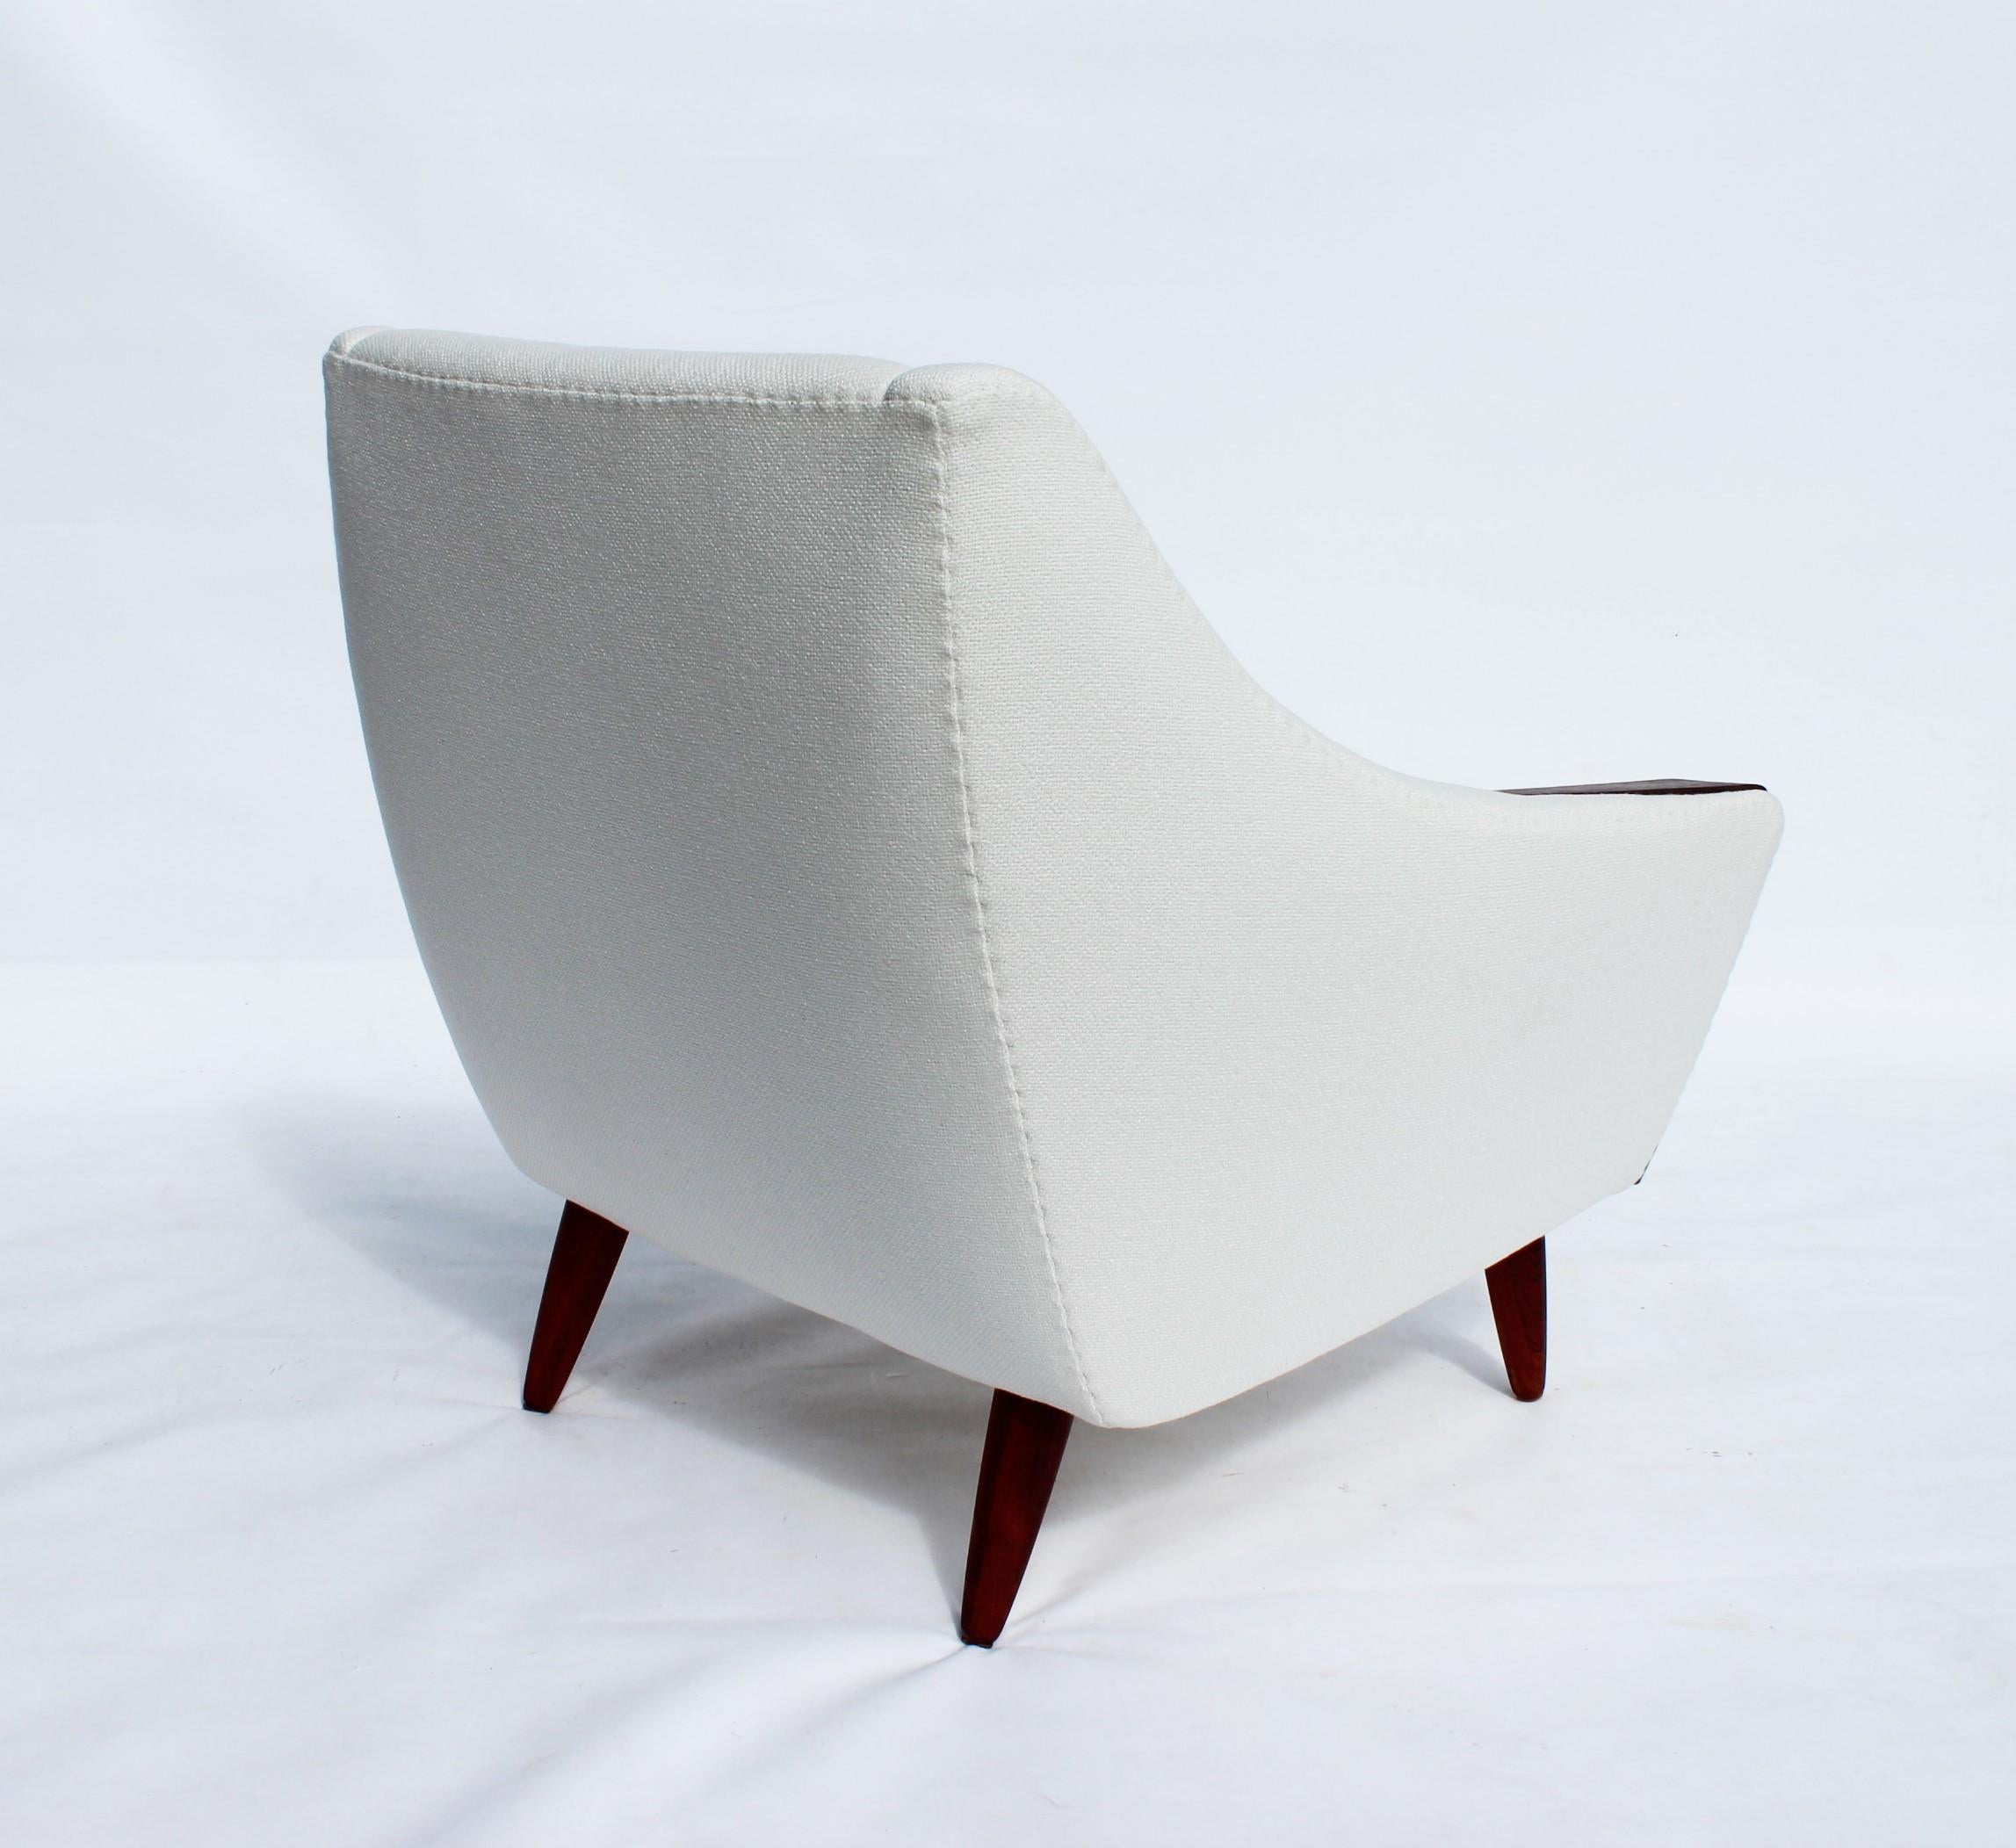 Mid-20th Century Easy Chair with Low Back Upholstered in White Fabric, Danish Design, 1960s For Sale